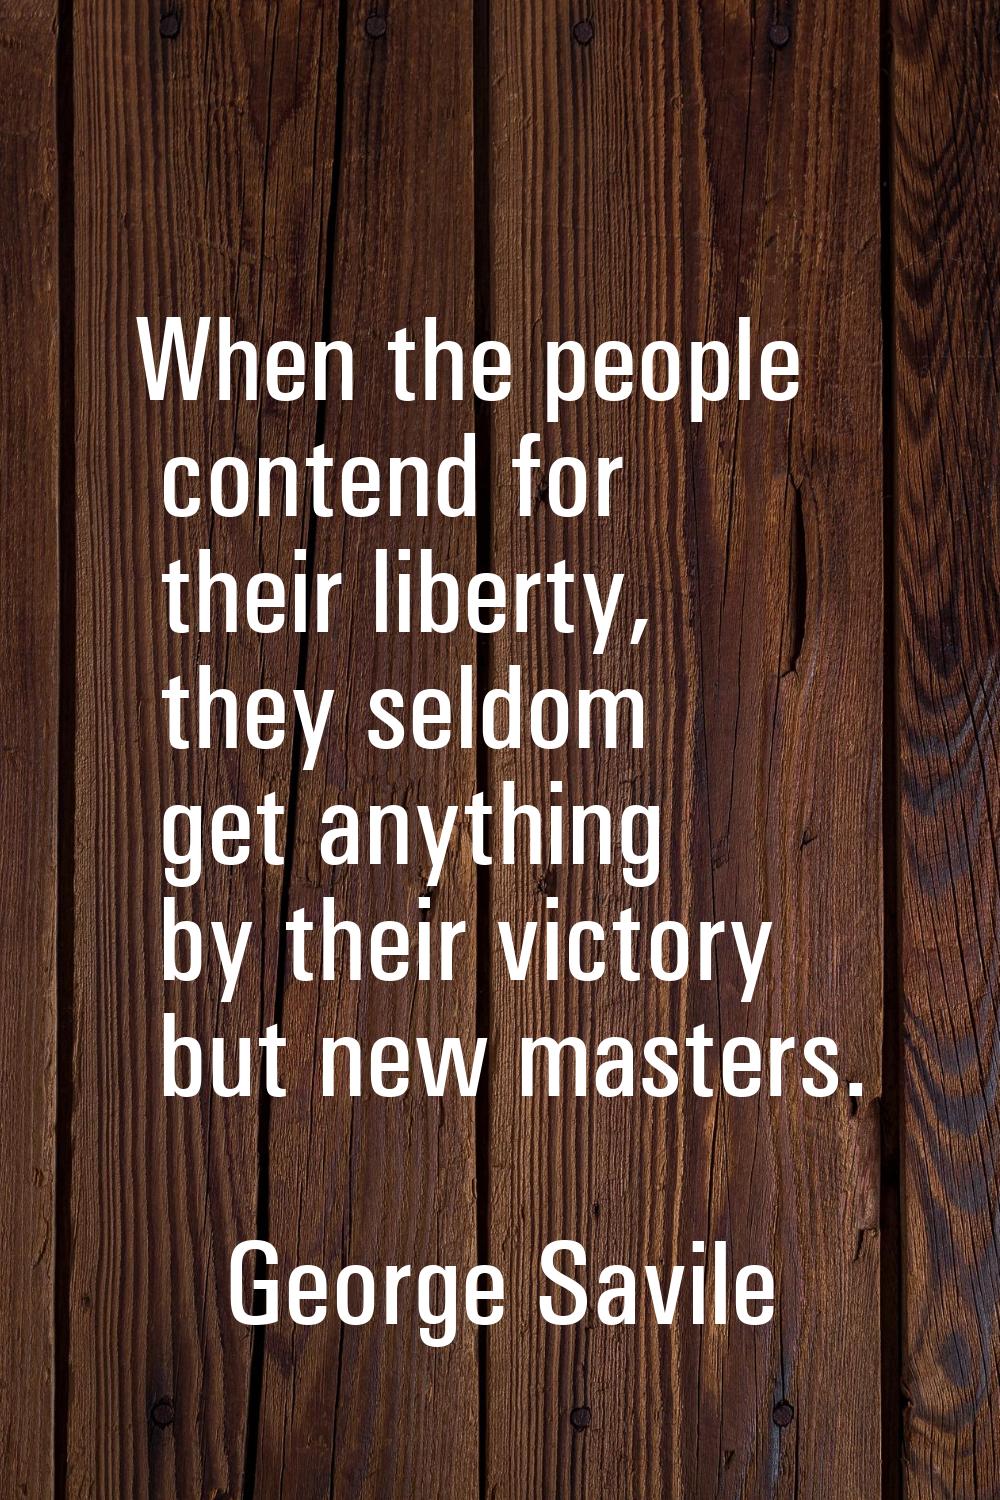 When the people contend for their liberty, they seldom get anything by their victory but new master